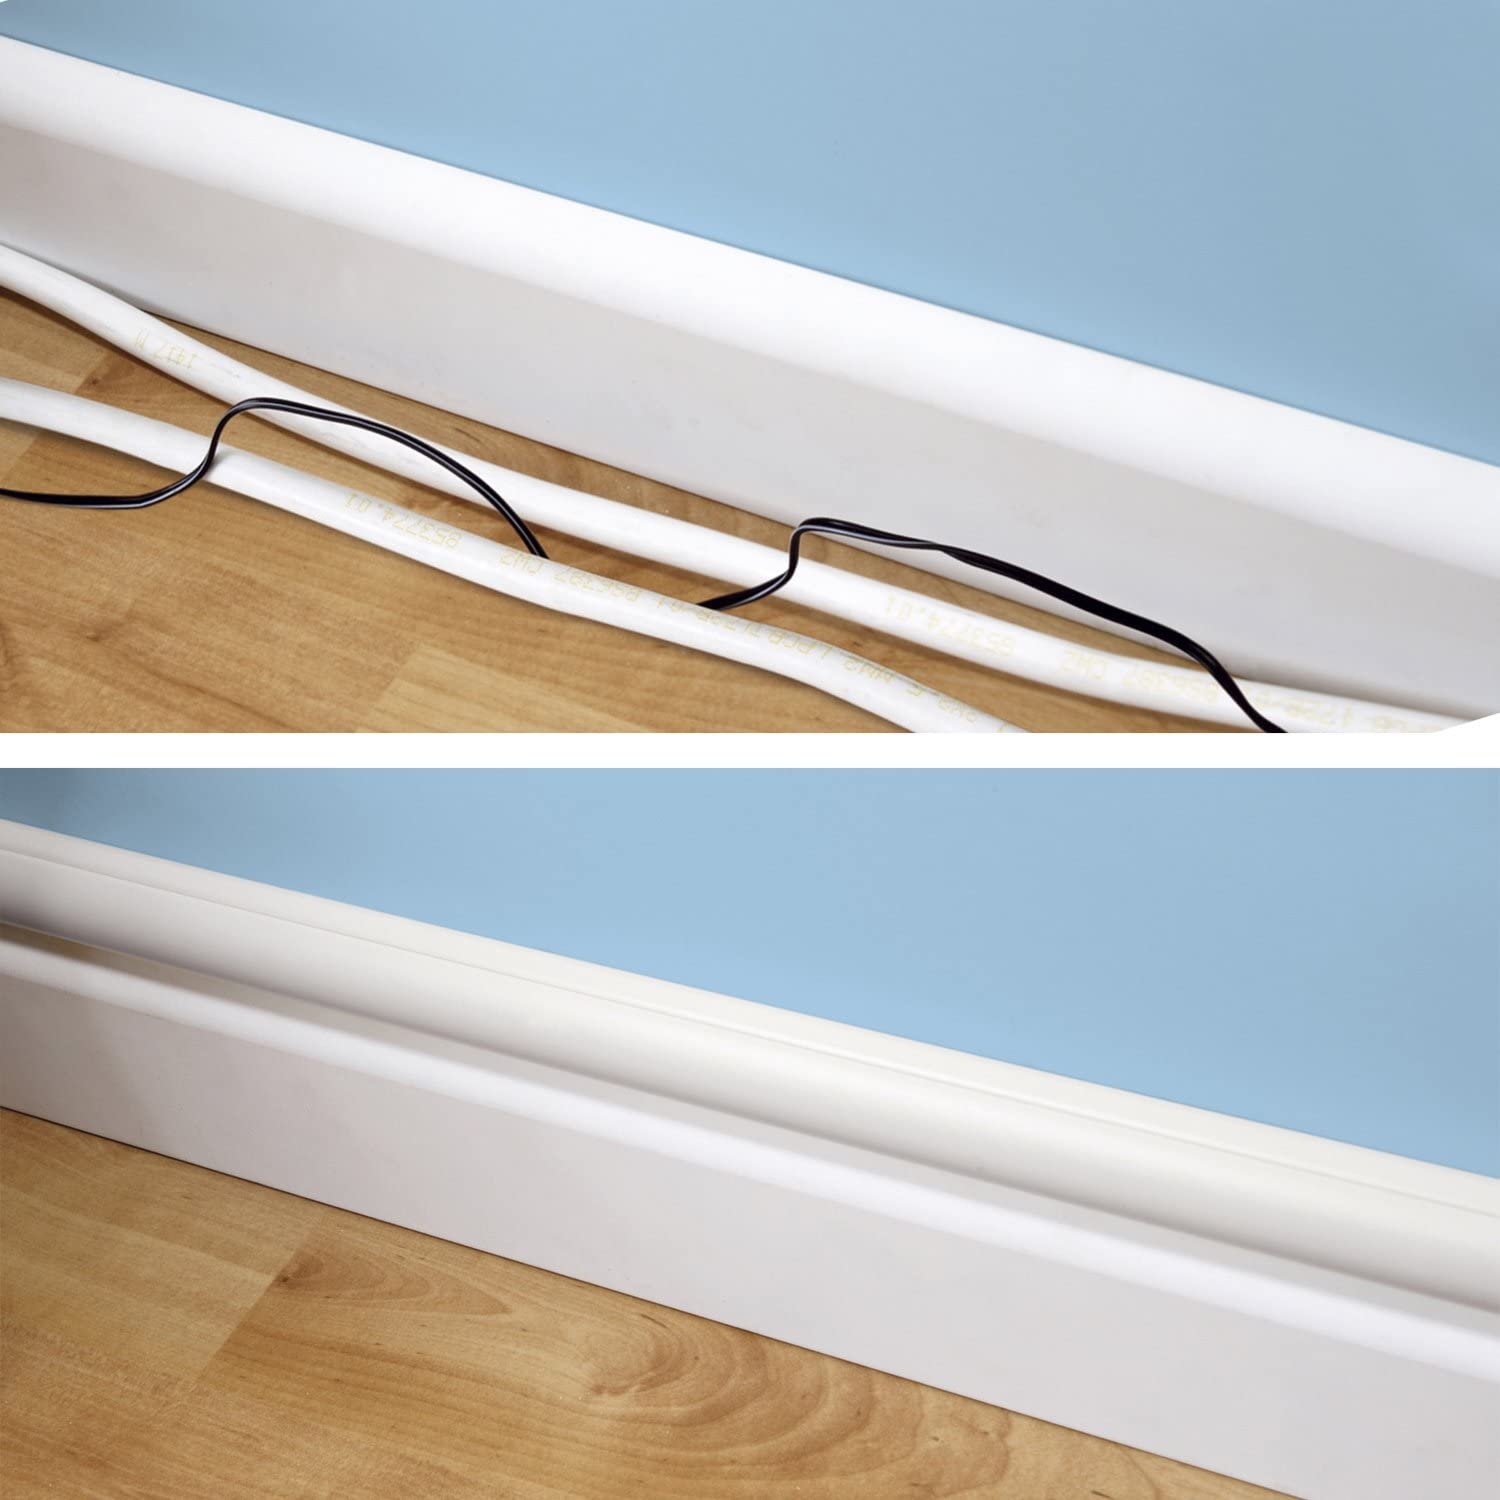 How To Hide Your Tv Wires Without Cutting Into Your Walls The Plug